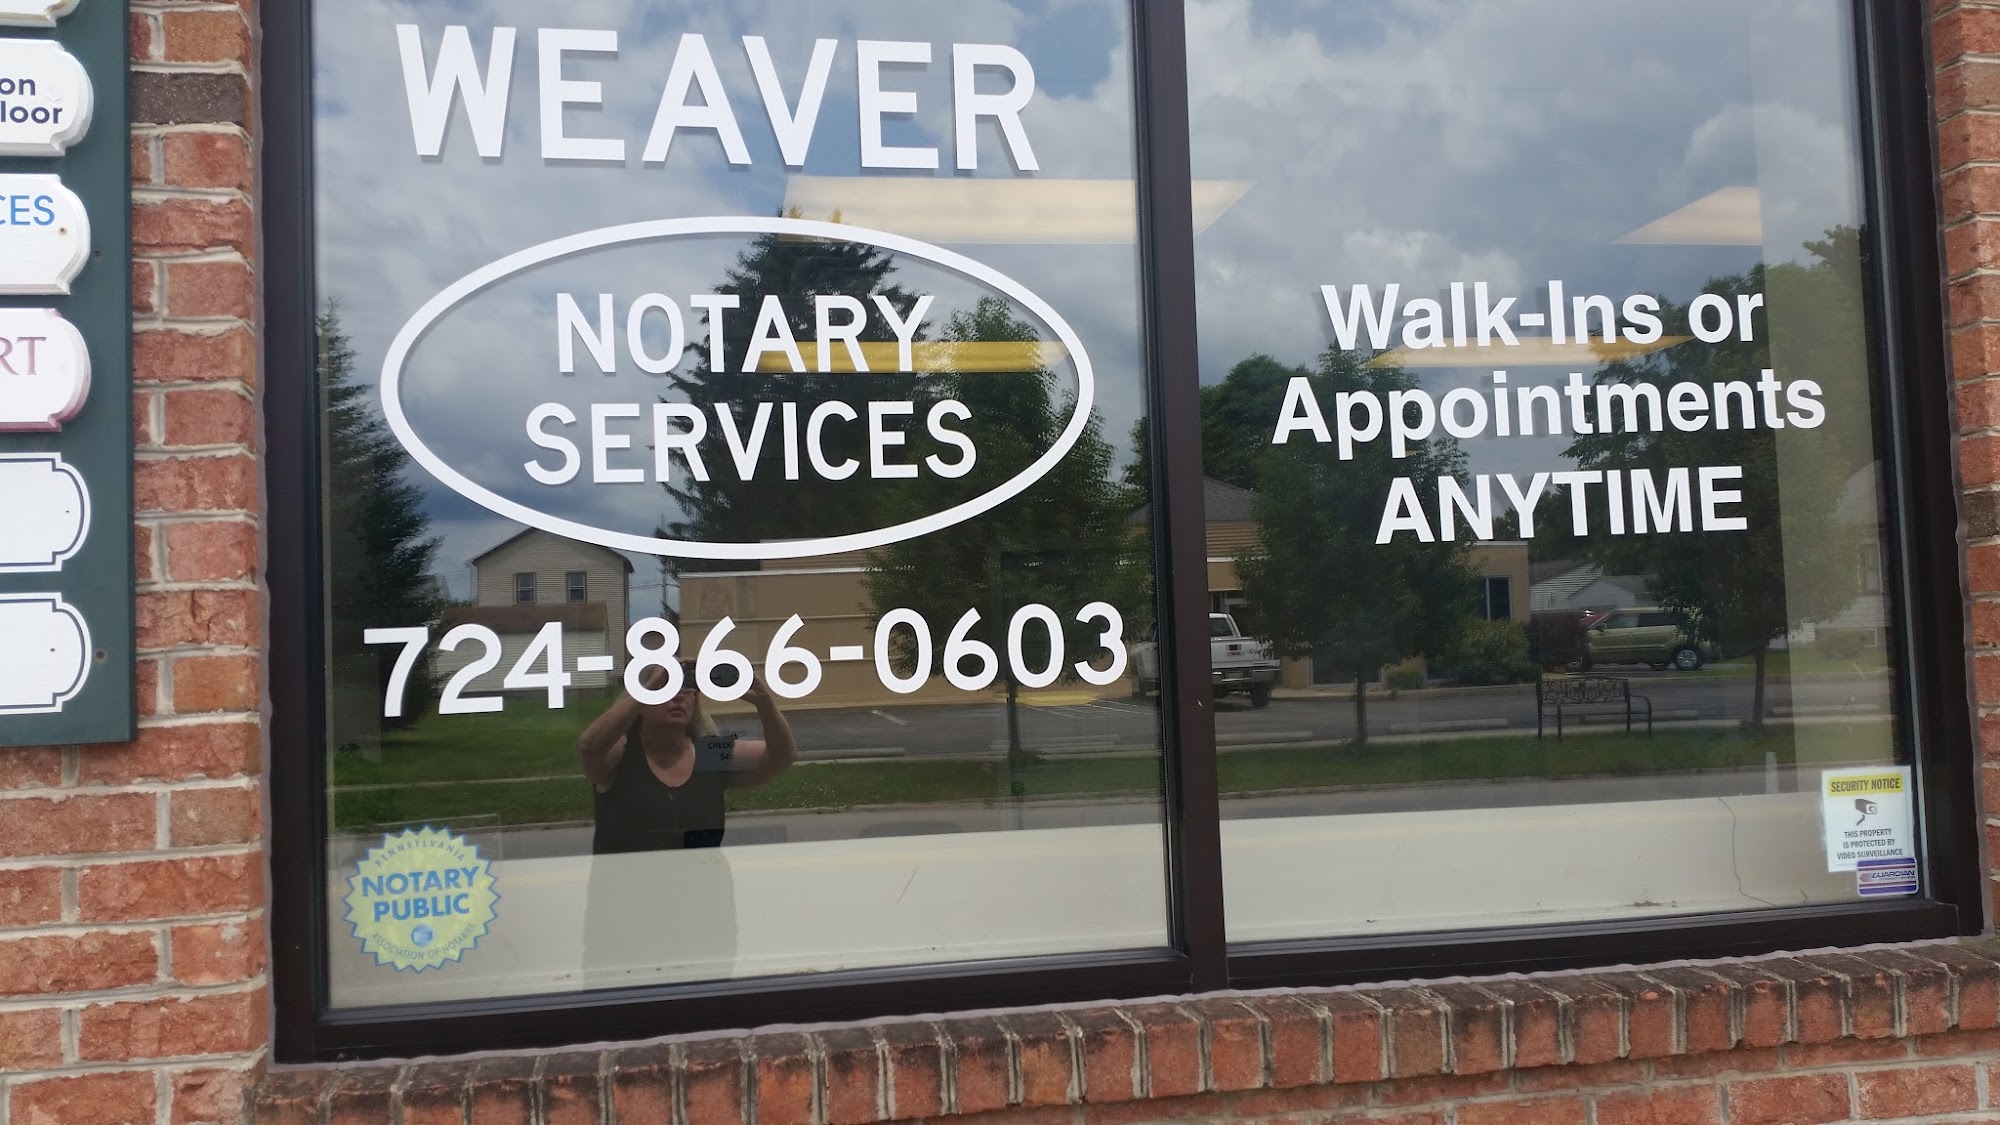 Weaver Notary Services